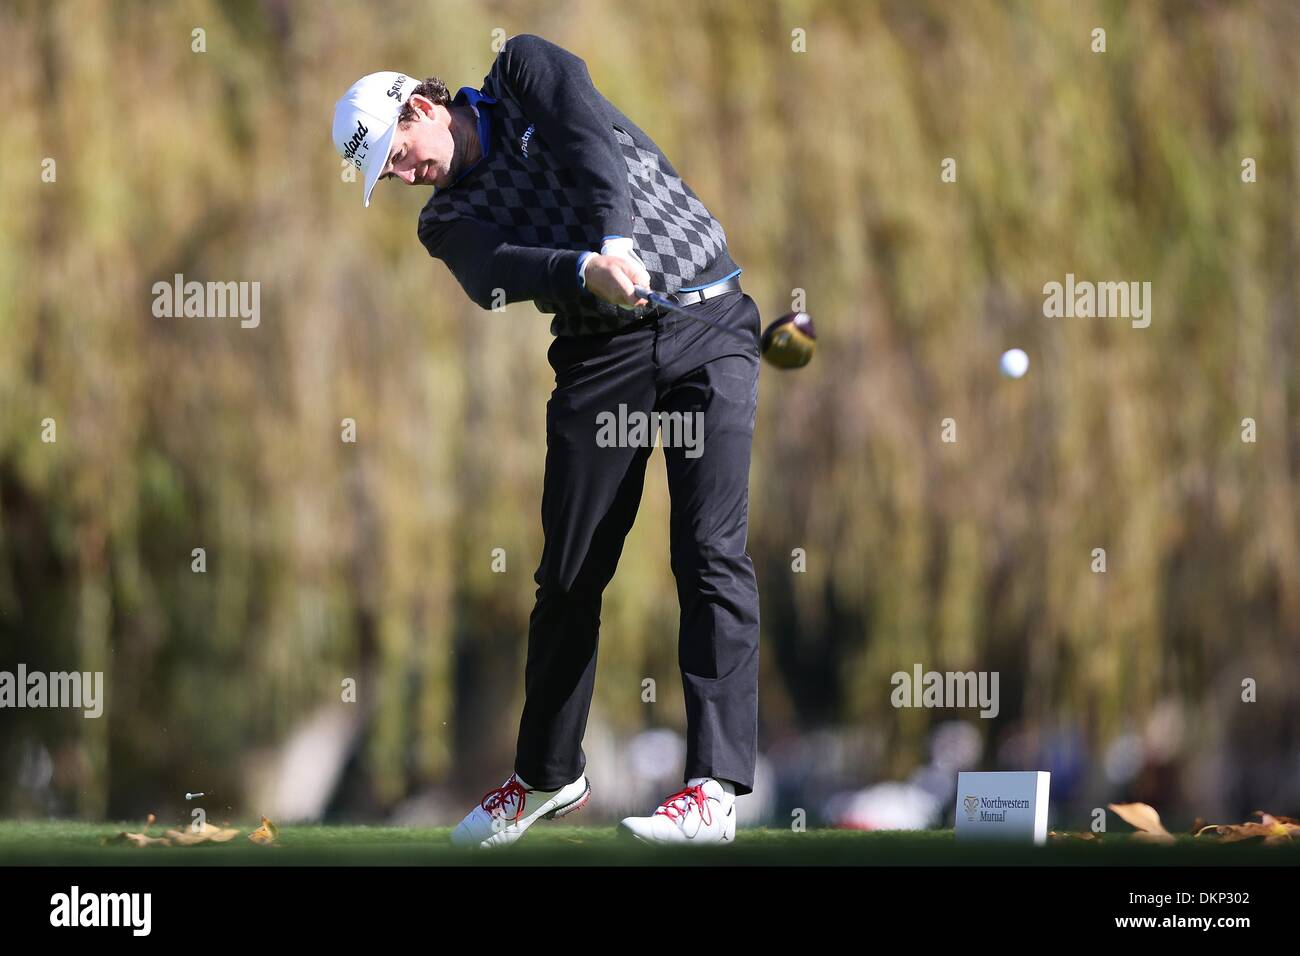 Thousand Oaks, California, USA. 7th Dec, 2013. 12/07/13 Thousand Oaks, CA: Keegan Bradley during the third round of the 2013 Northwestern Mutual World Challenge played at Sherwood Country Club. The yearly event benefits the Tiger Woods Foundation. © Michael Zito/Eclipse/ZUMAPRESS.com/Alamy Live News Stock Photo